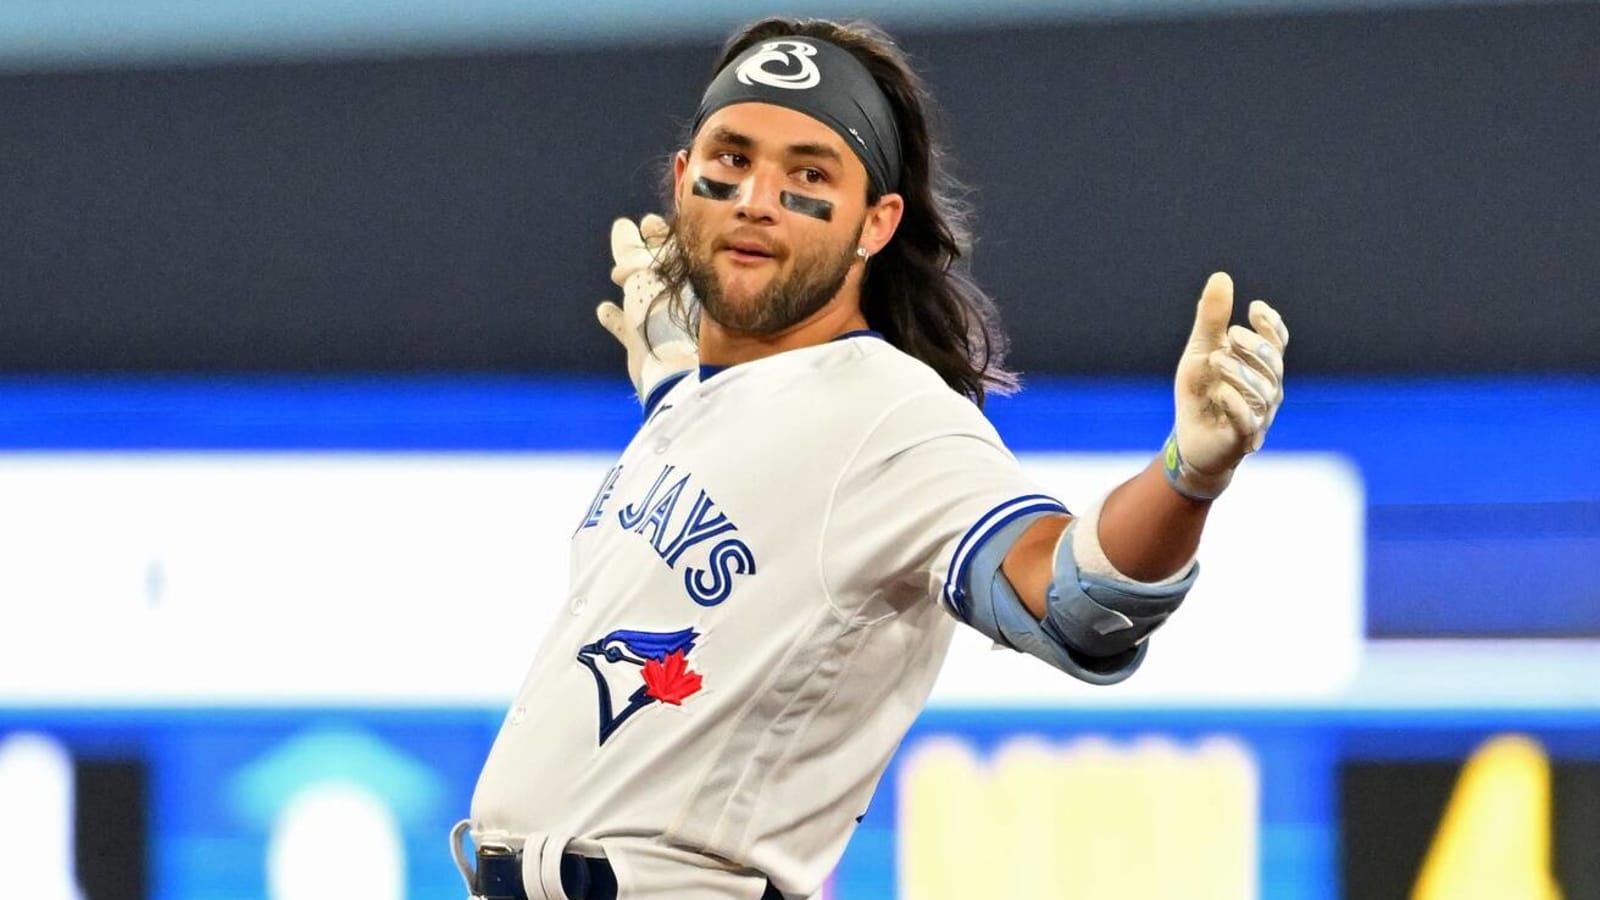 Bo Bichette becomes the fastest Blue Jay to 500 hits as Blue Jays end Tampa’s winning streak at 13 with 6-3 win